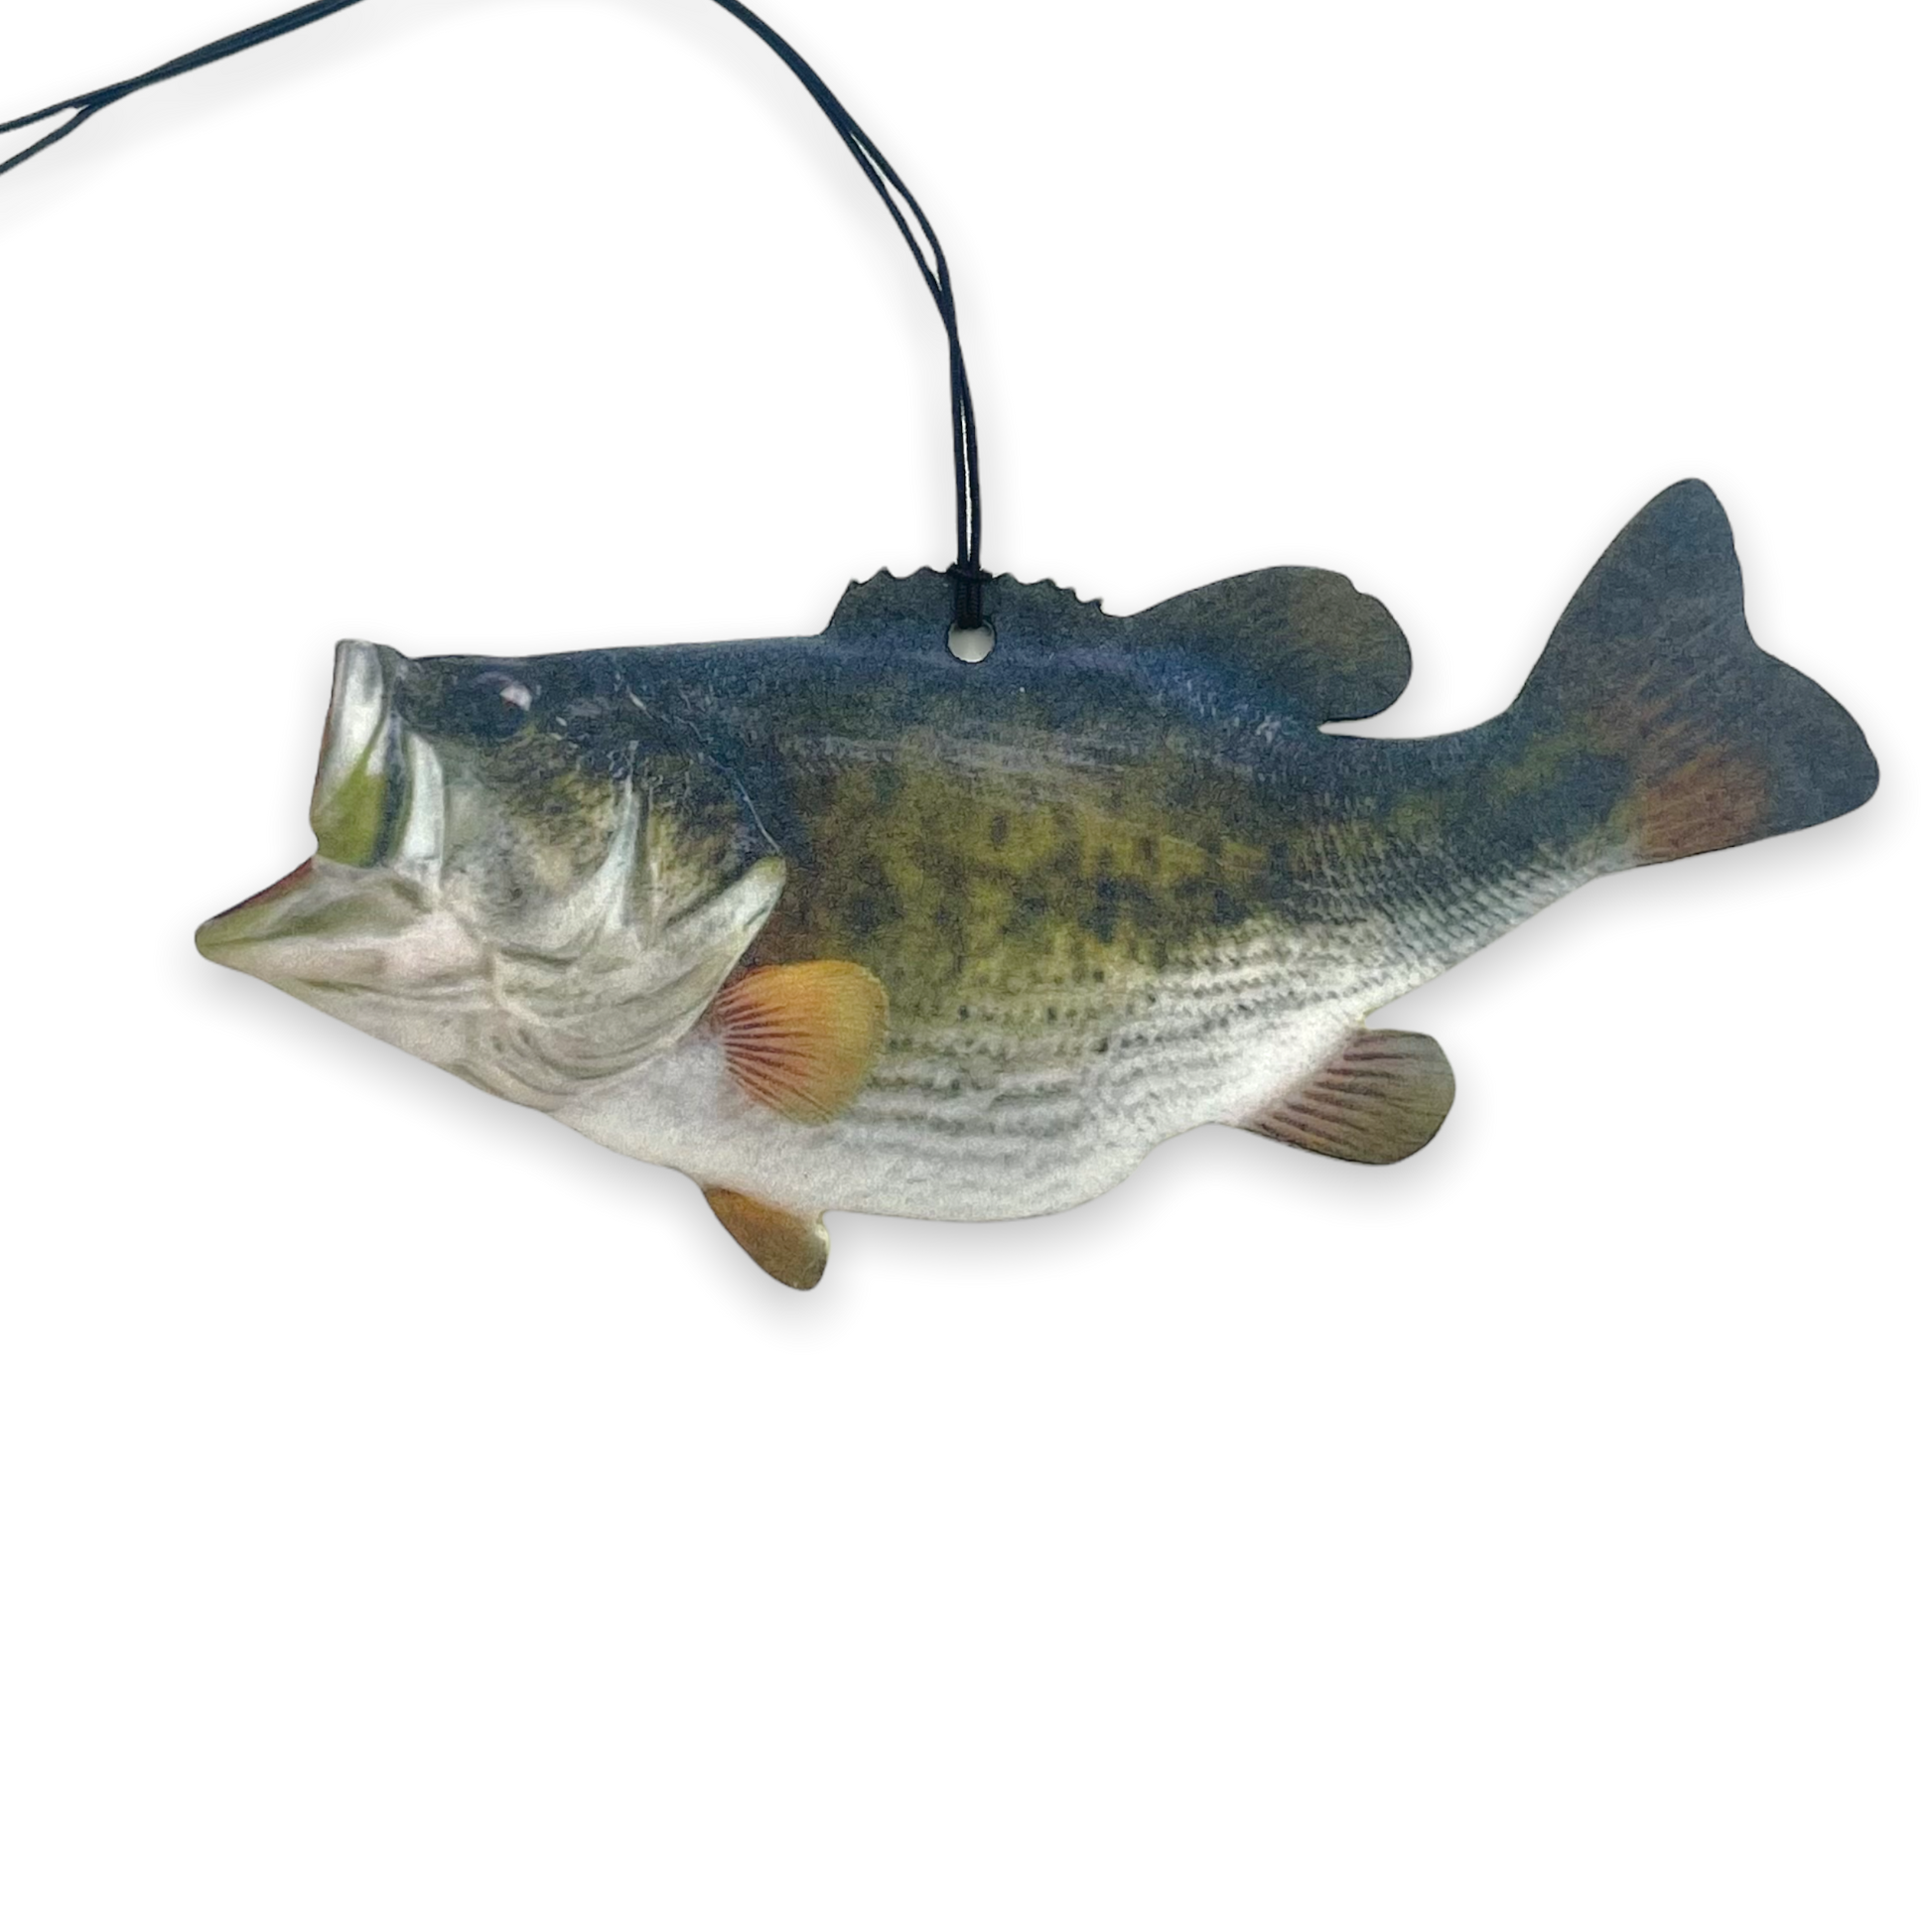 Fish Shaped Air Freshener Sublimation Blank - Pioneer Supplier & Creations